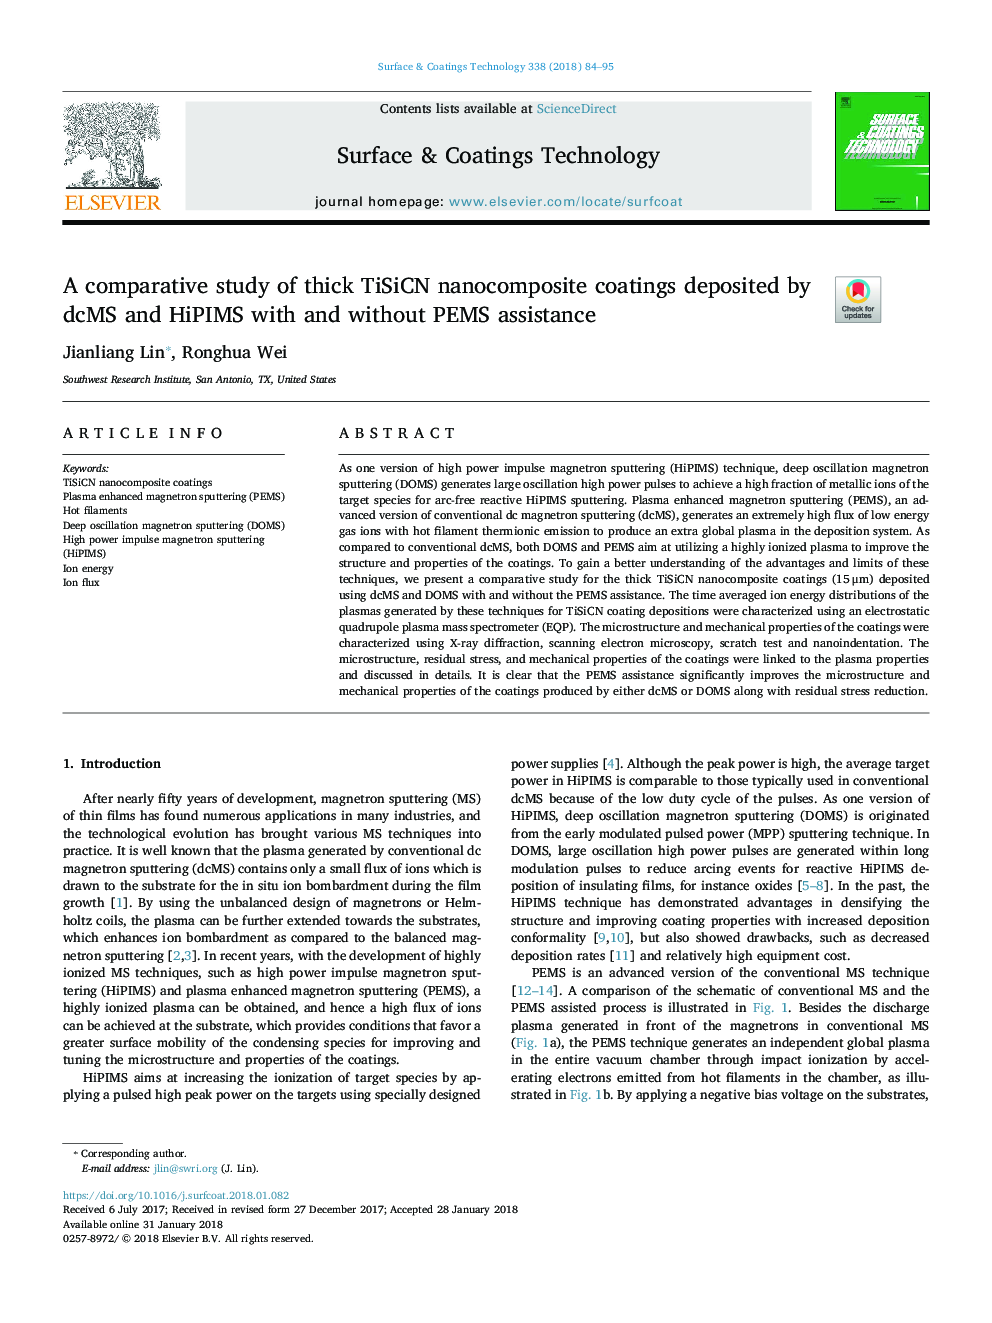 A comparative study of thick TiSiCN nanocomposite coatings deposited by dcMS and HiPIMS with and without PEMS assistance